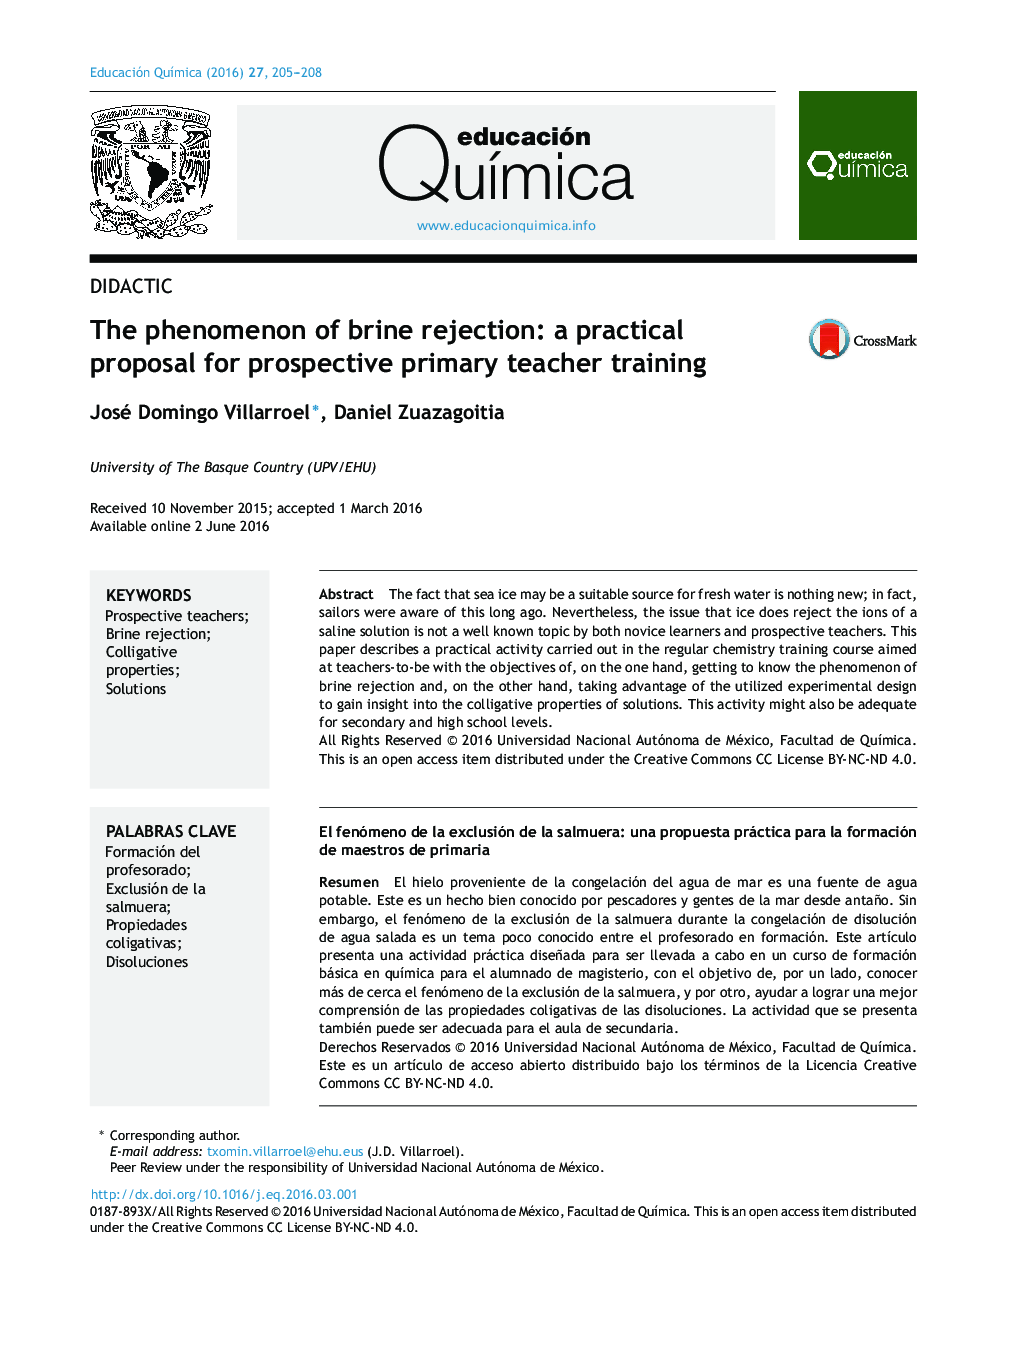 The phenomenon of brine rejection: a practical proposal for prospective primary teacher training 